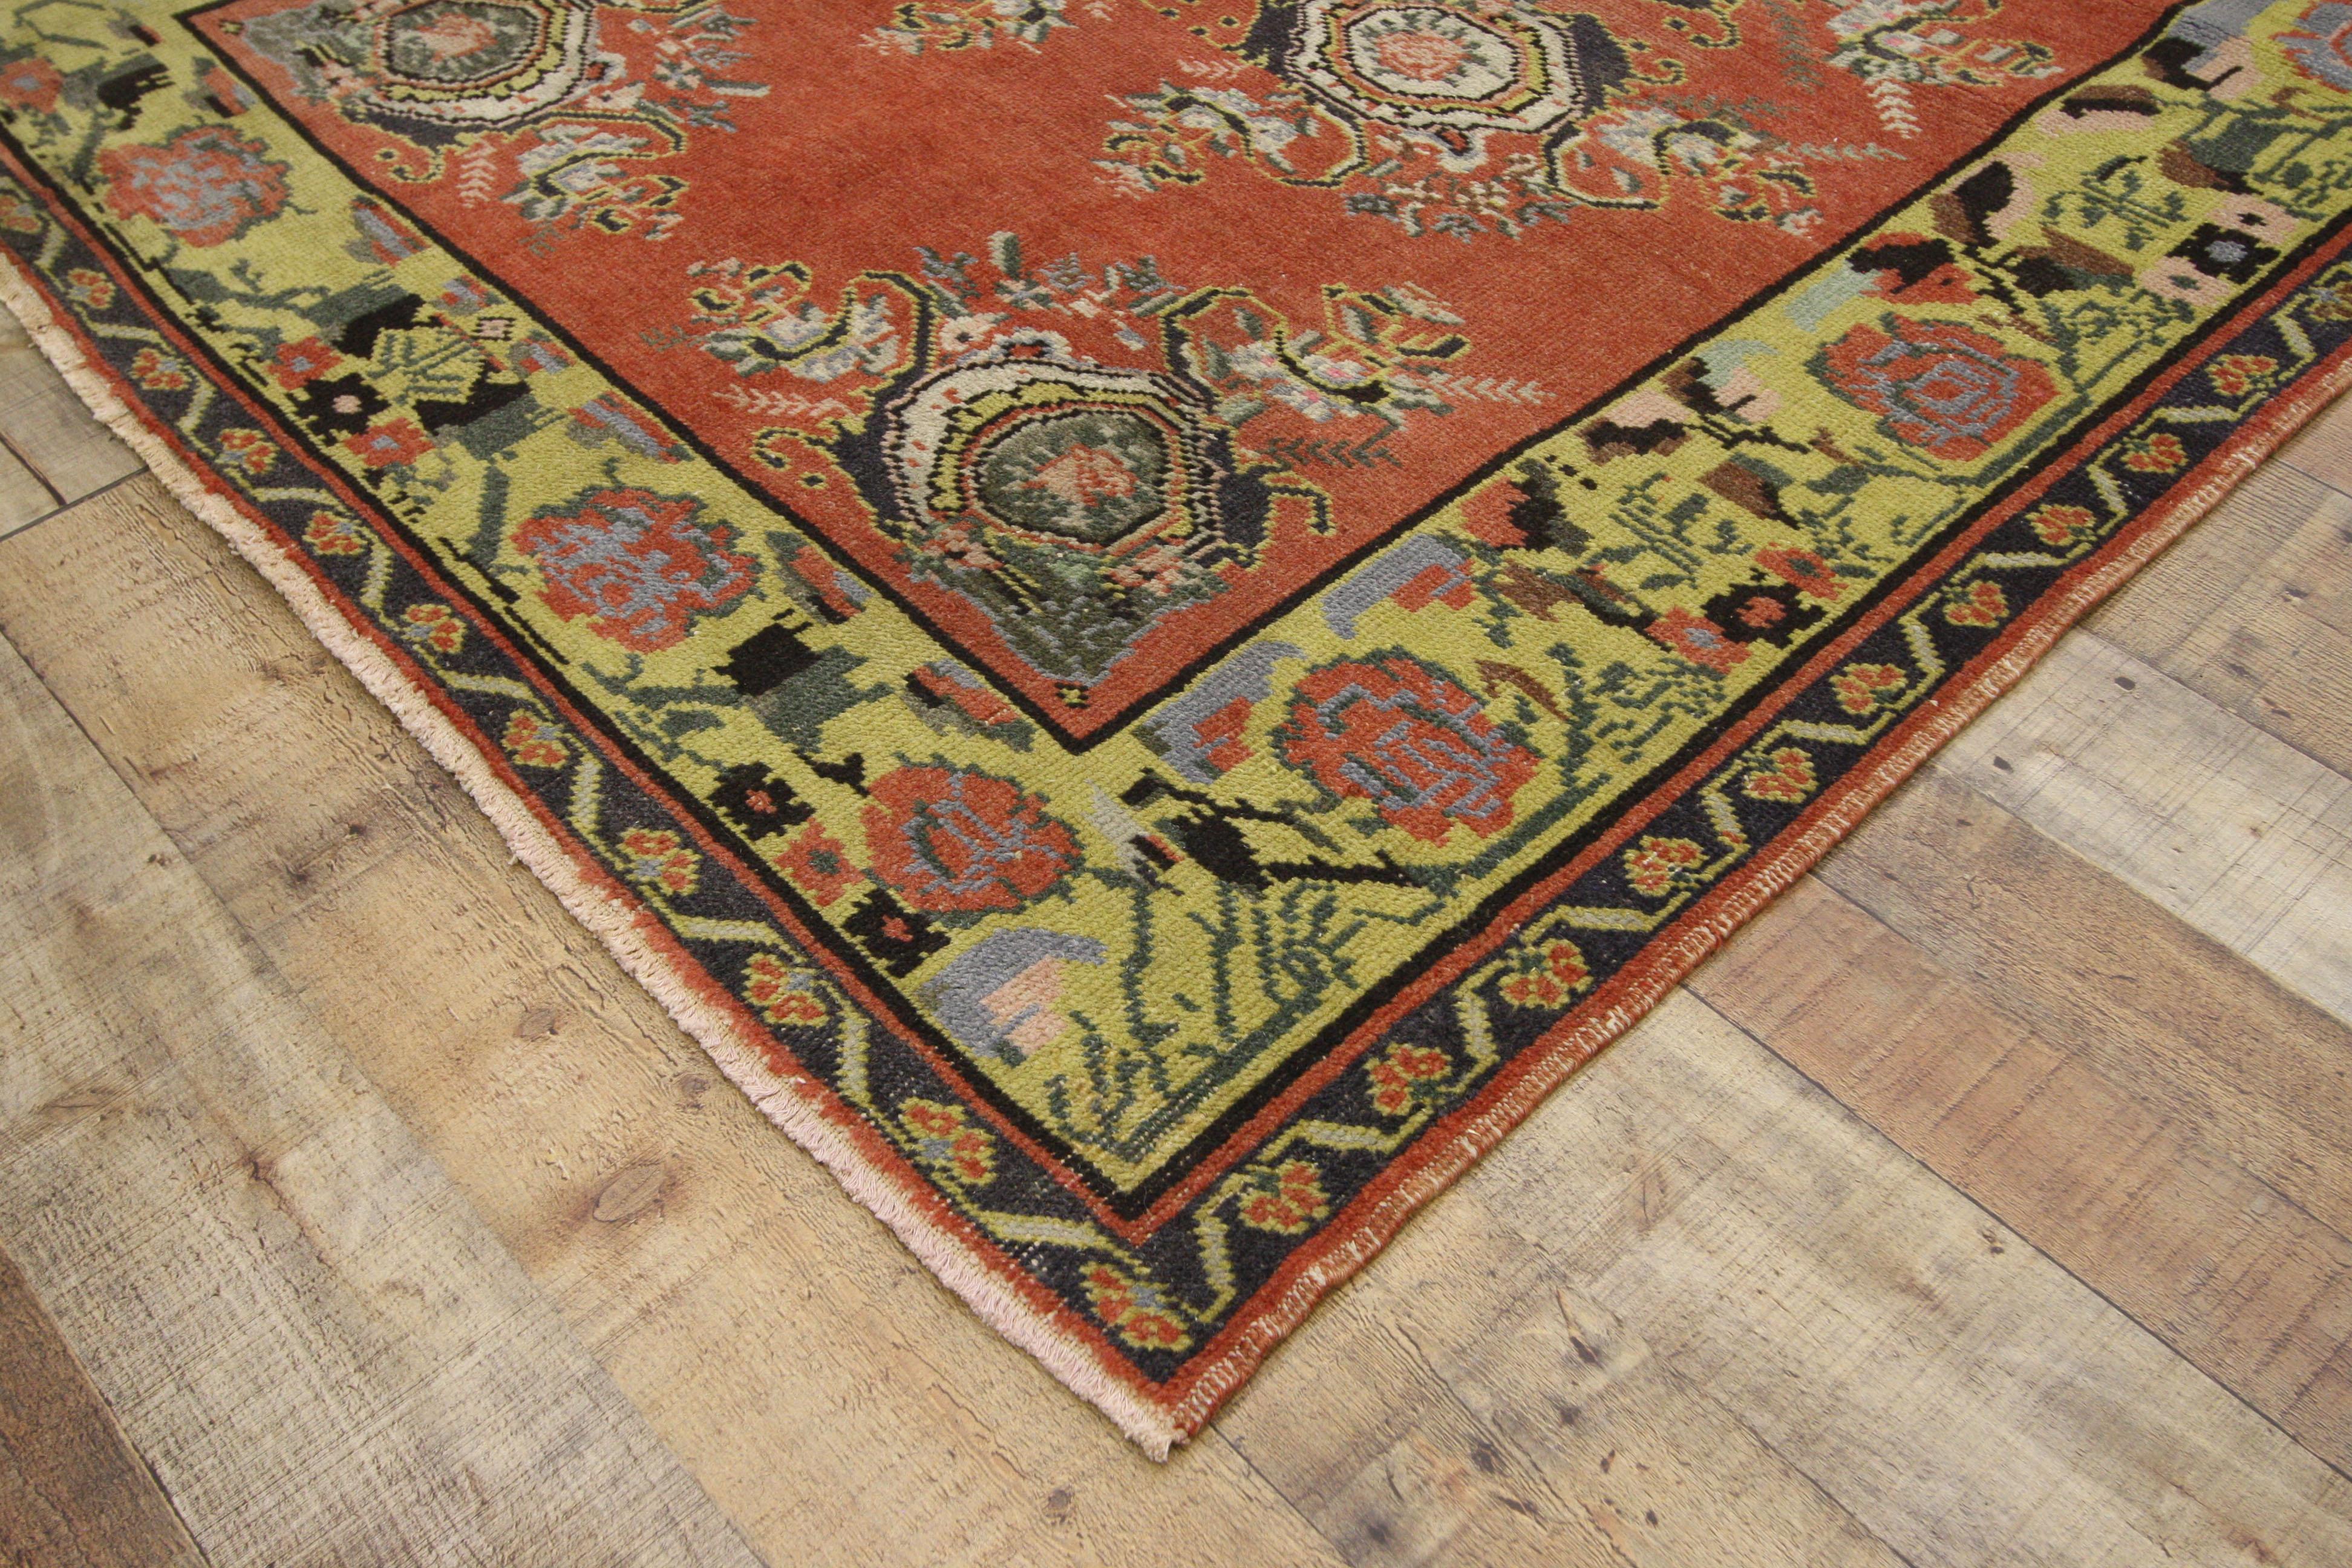 52392 vintage Turkish Oushak wide hallway runner with Art Deco Expressionist style . This hand knotted wool distressed vintage Turkish Oushak runner features large cabbage rose motifs arranged in quatrefoil bouquets spread across an abrashed field.